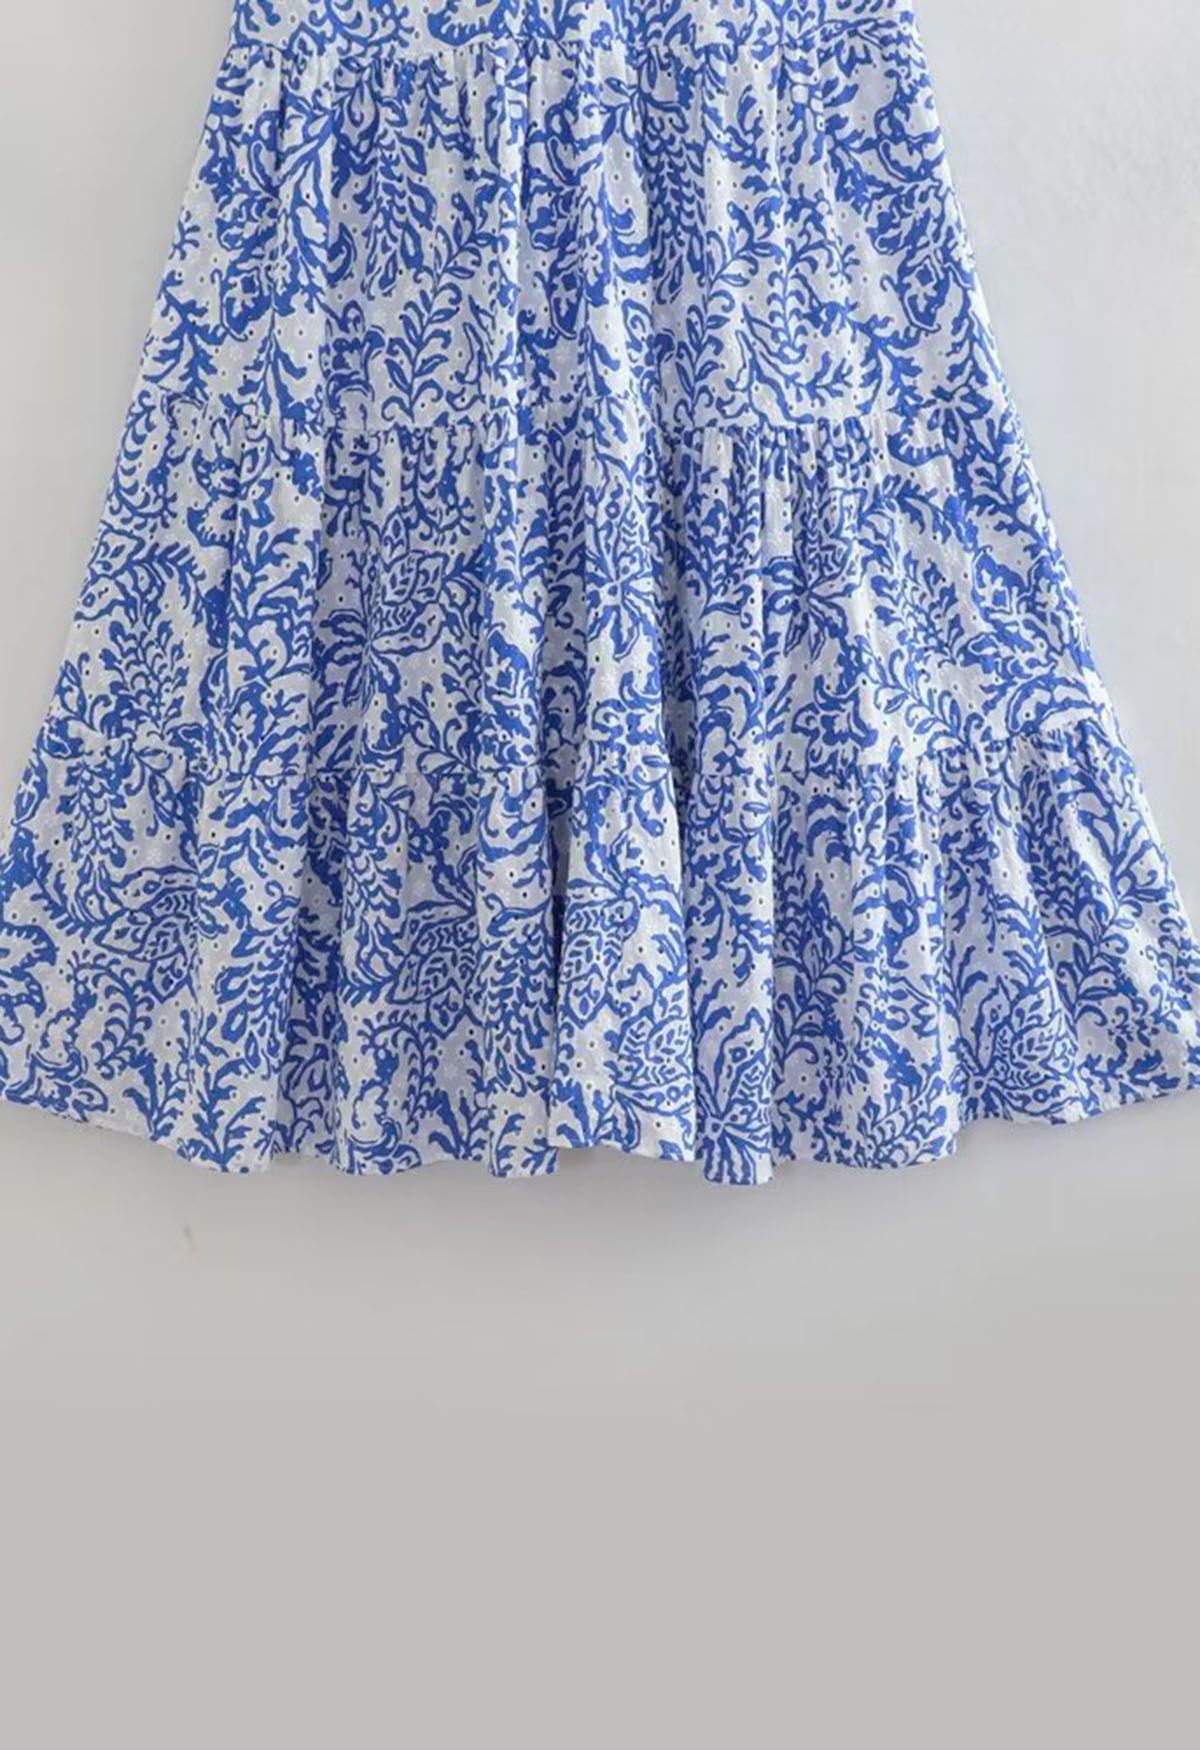 Blue Floral Cutout Back Eyelet Embroidery Dress - Retro, Indie and ...